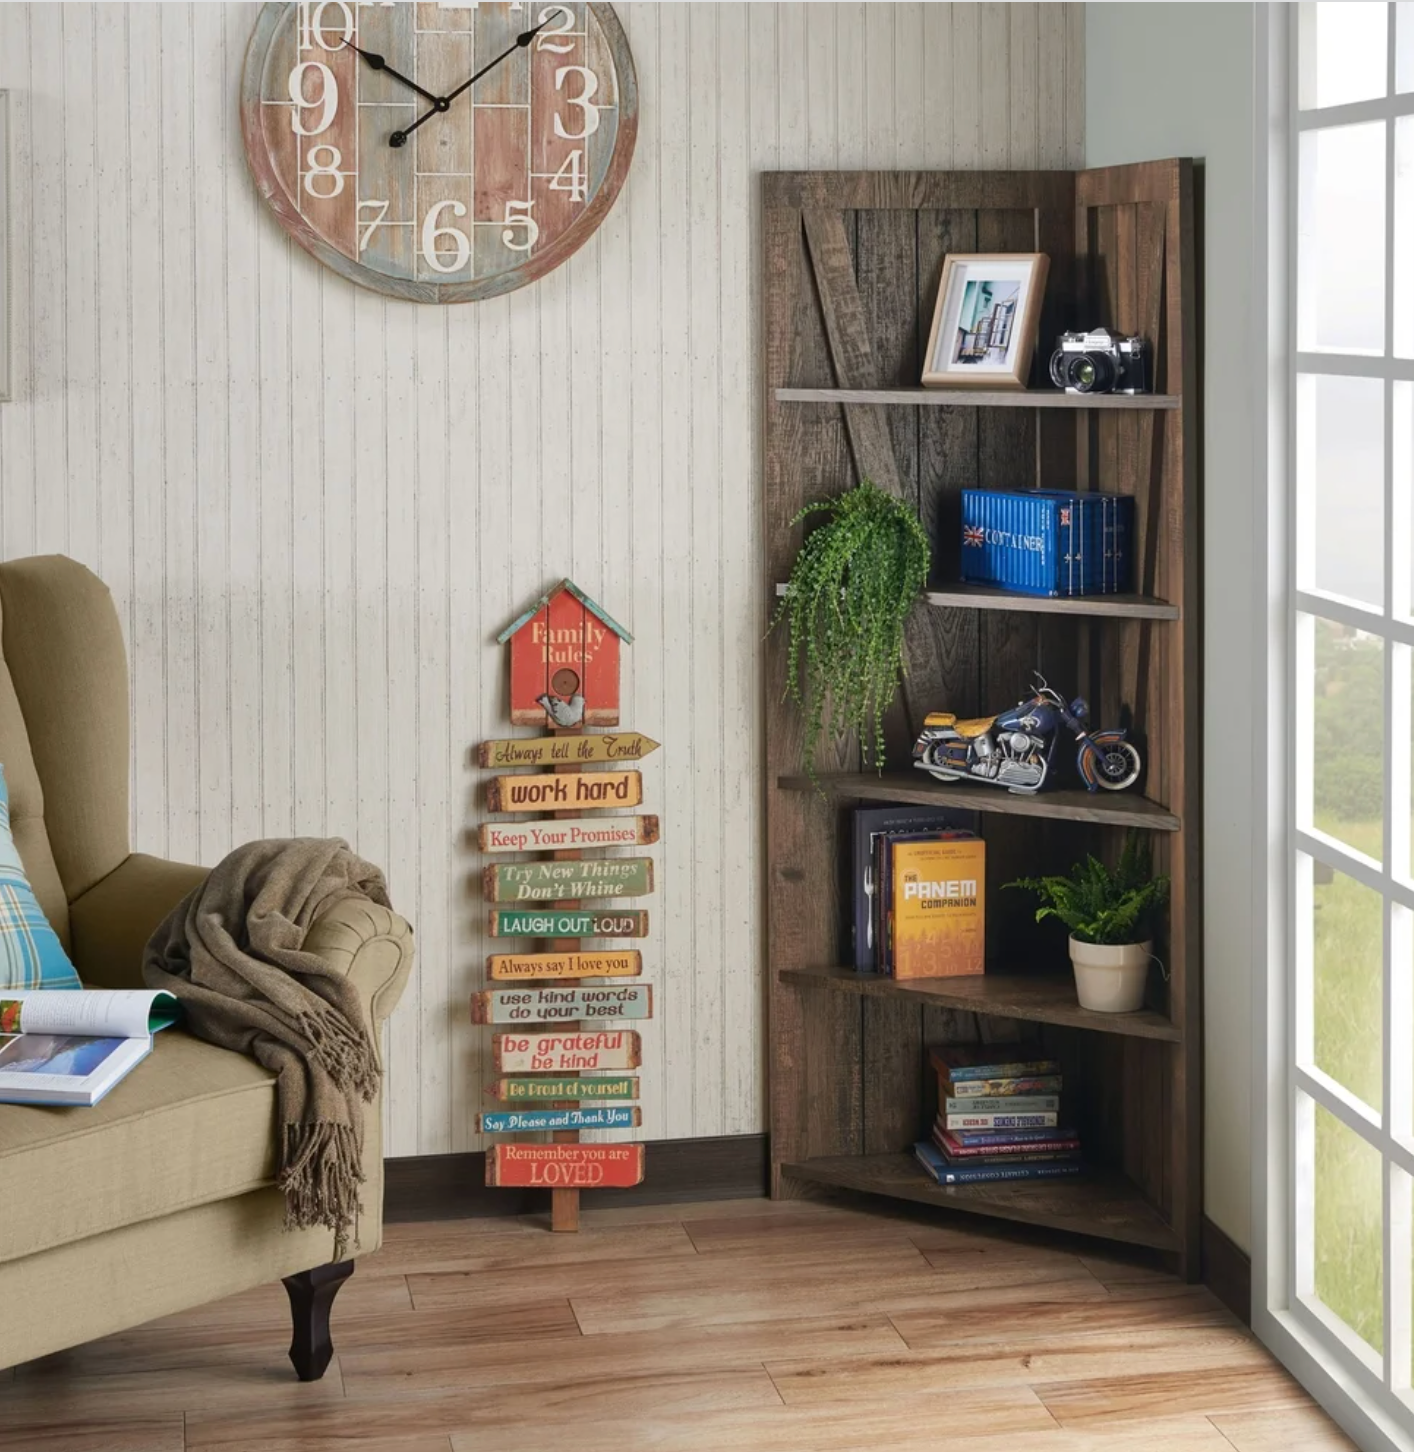 Brown rustic five-tier shelf with books, plants, and knick-knacks